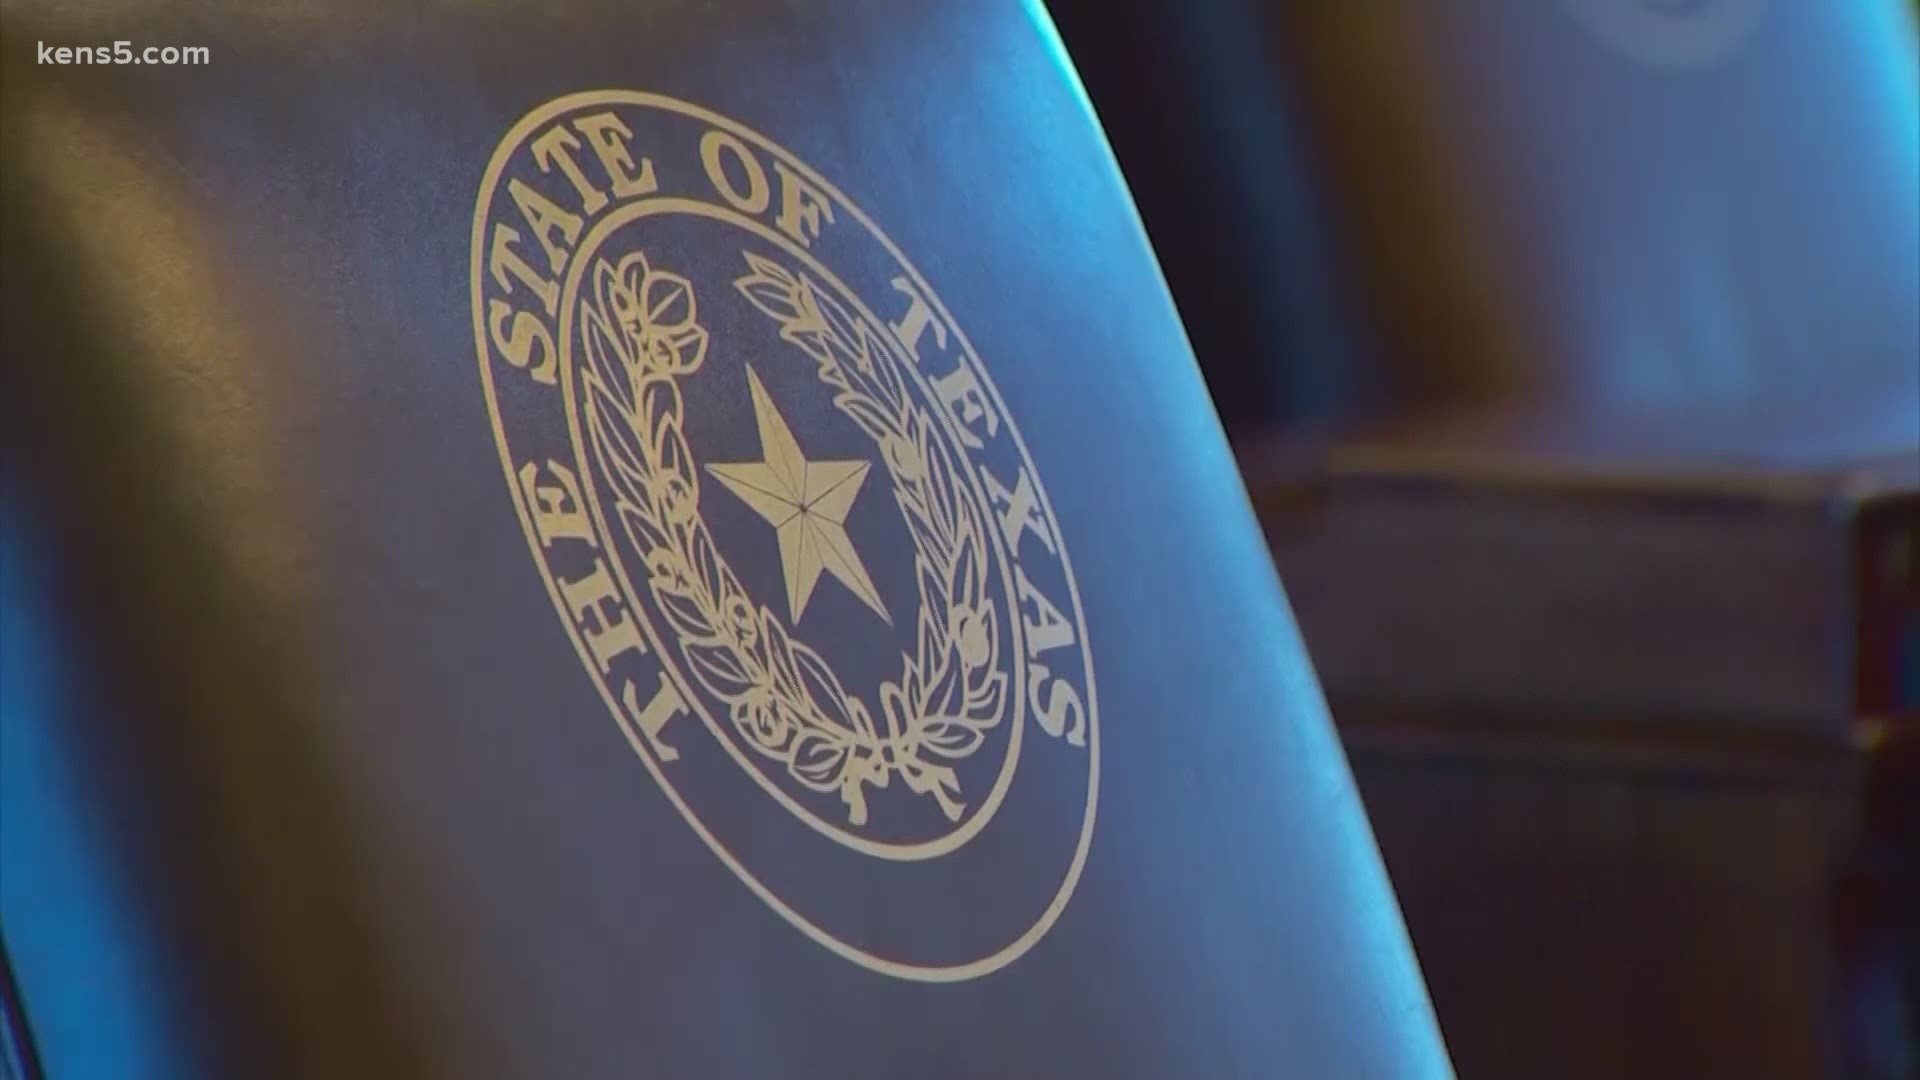 Vetoing the legislative budget would not just keep lawmakers from getting paid, but Texas Capitol staff as well.